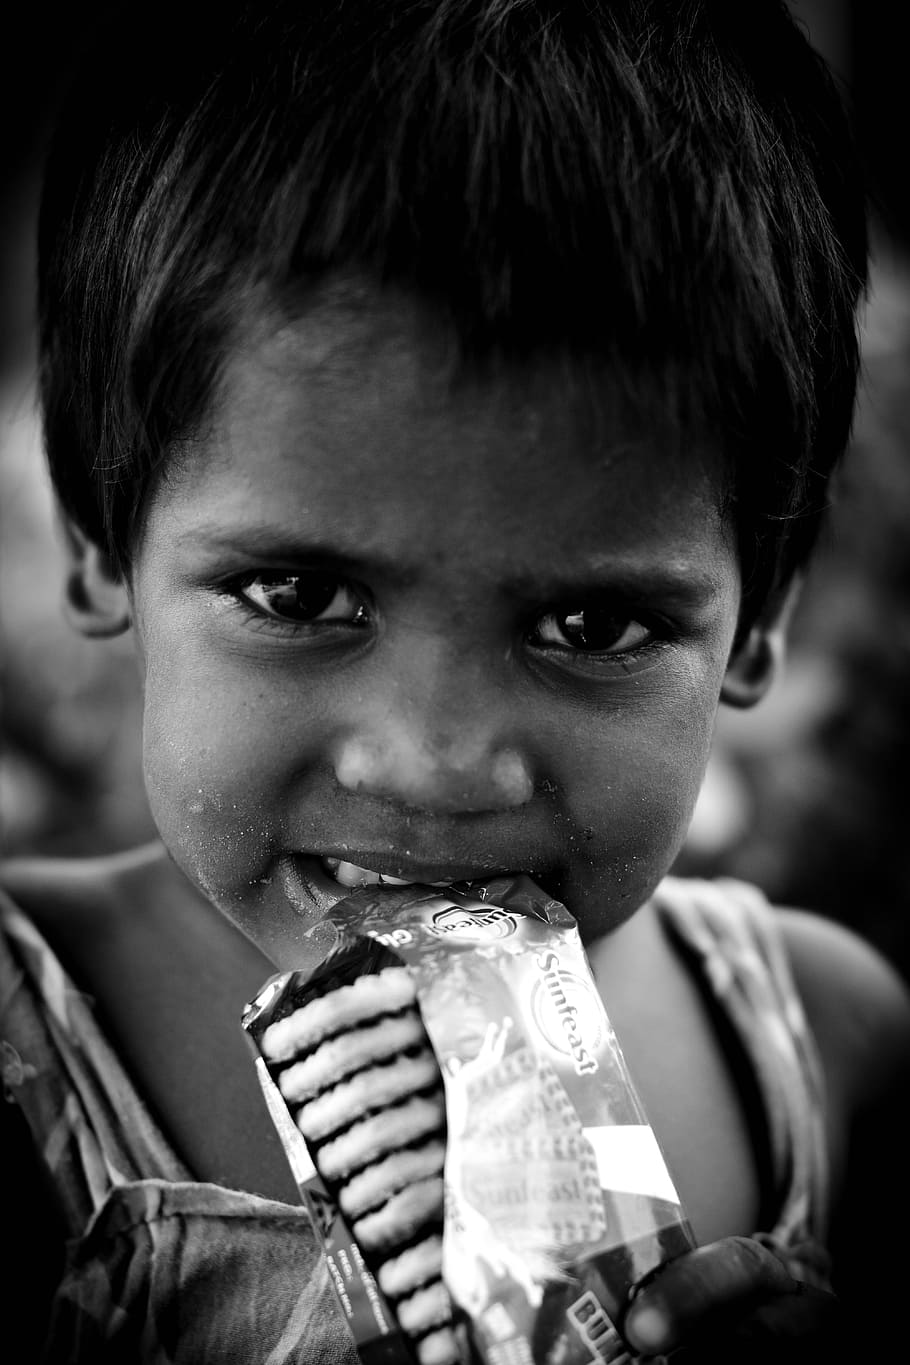 child, people, portrait, facial expression, india, hunger, happiness, headshot, one person, boys